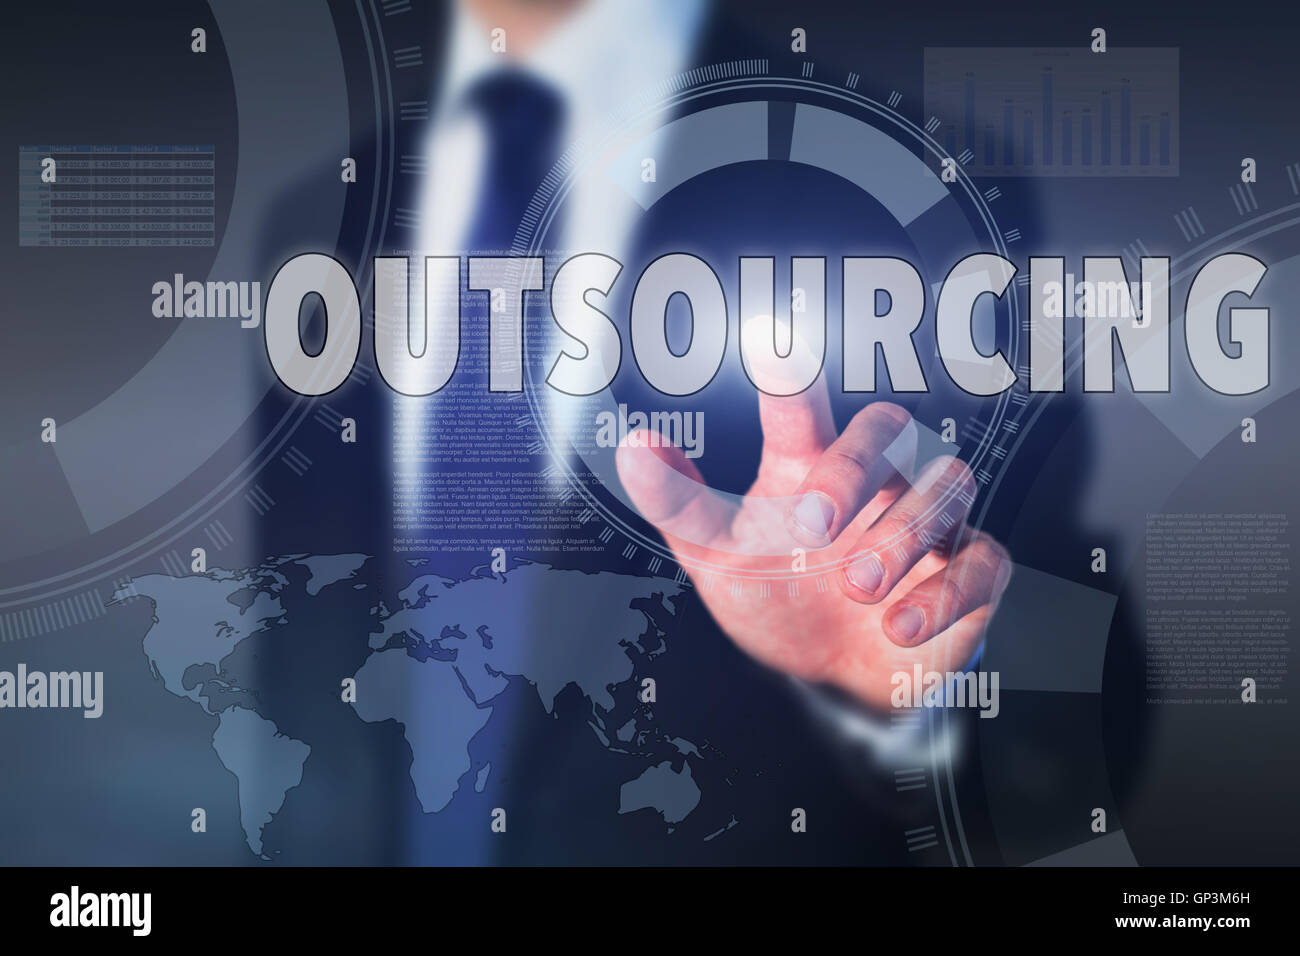 outsourcing concept Stock Photo